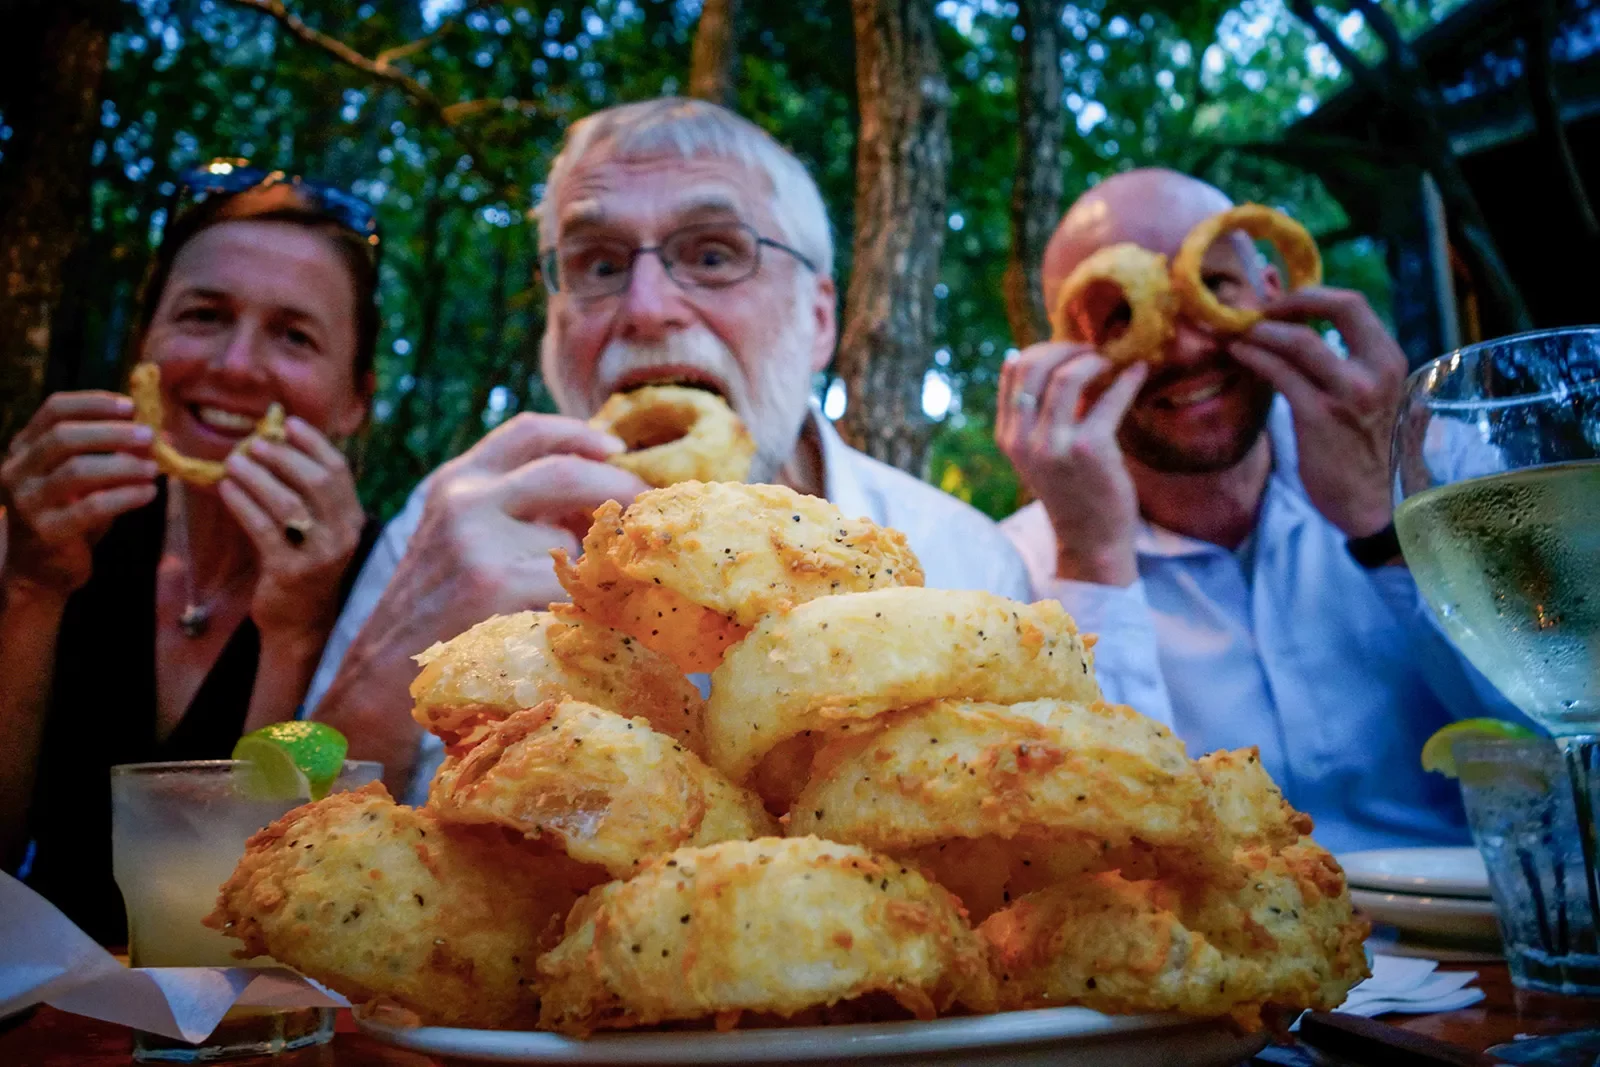 Backroads guests enjoying onions rings and company